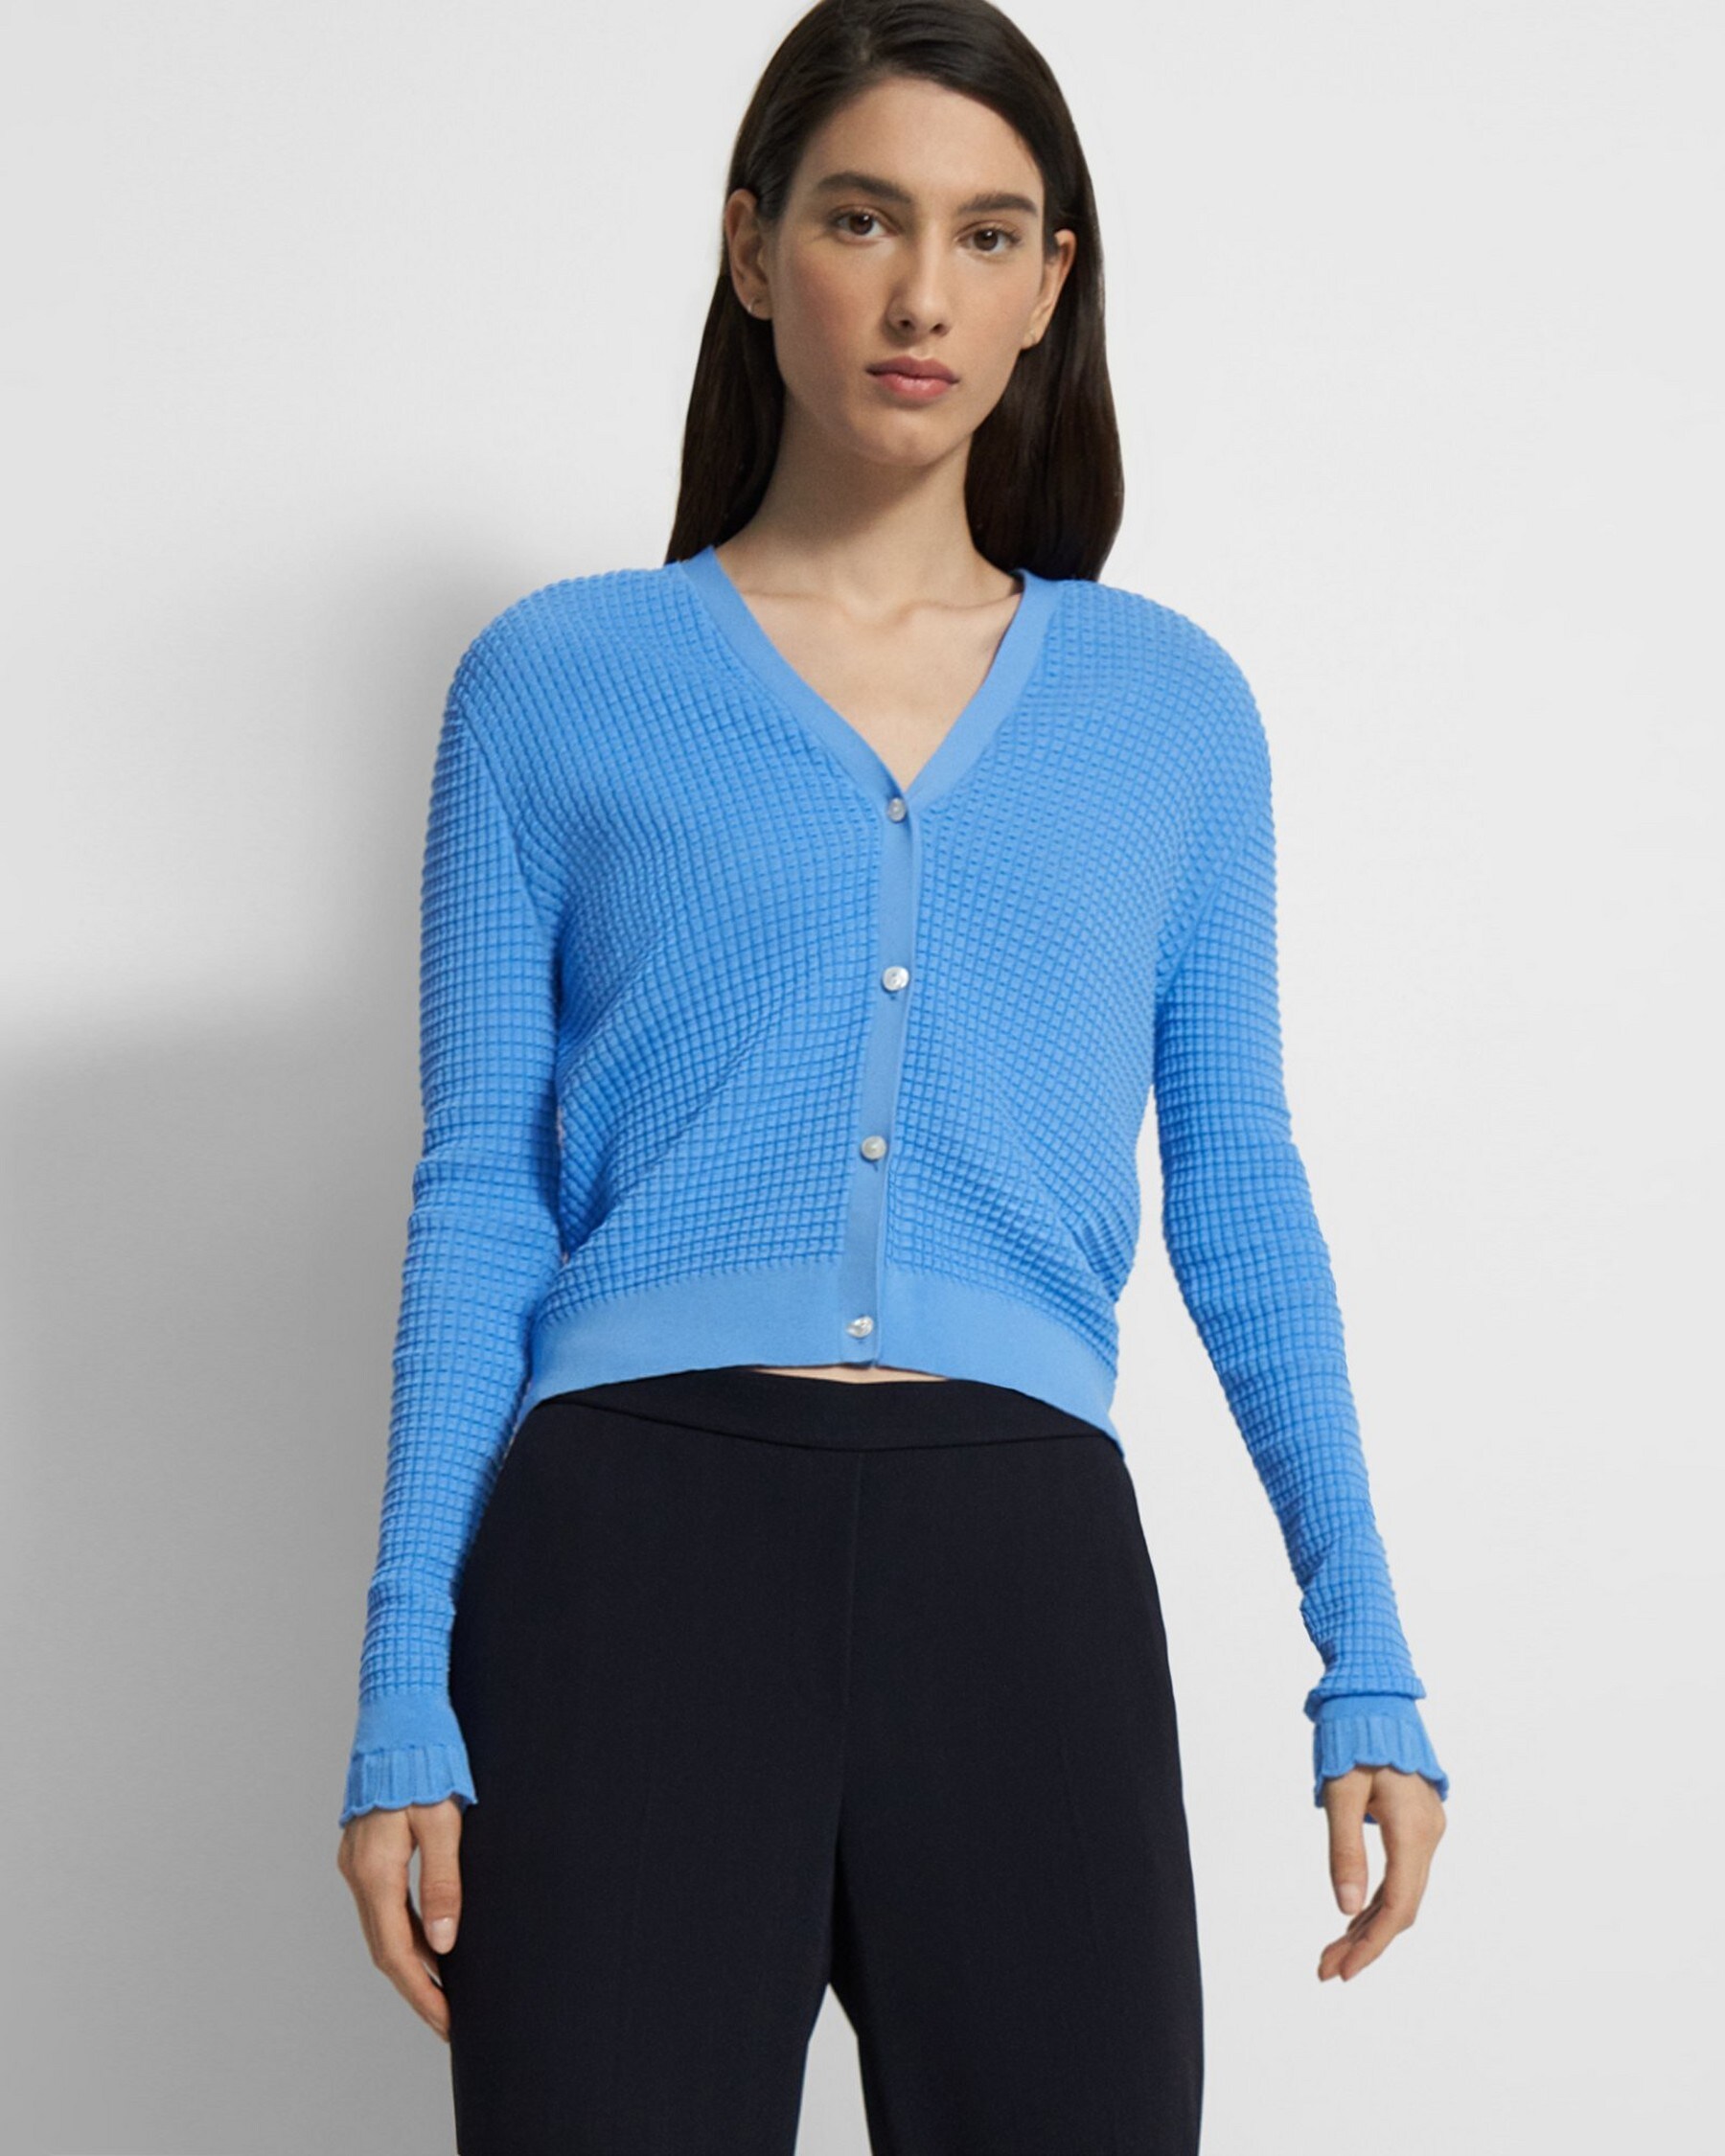 Theory V-Neck Cardigan in Cotton Blend